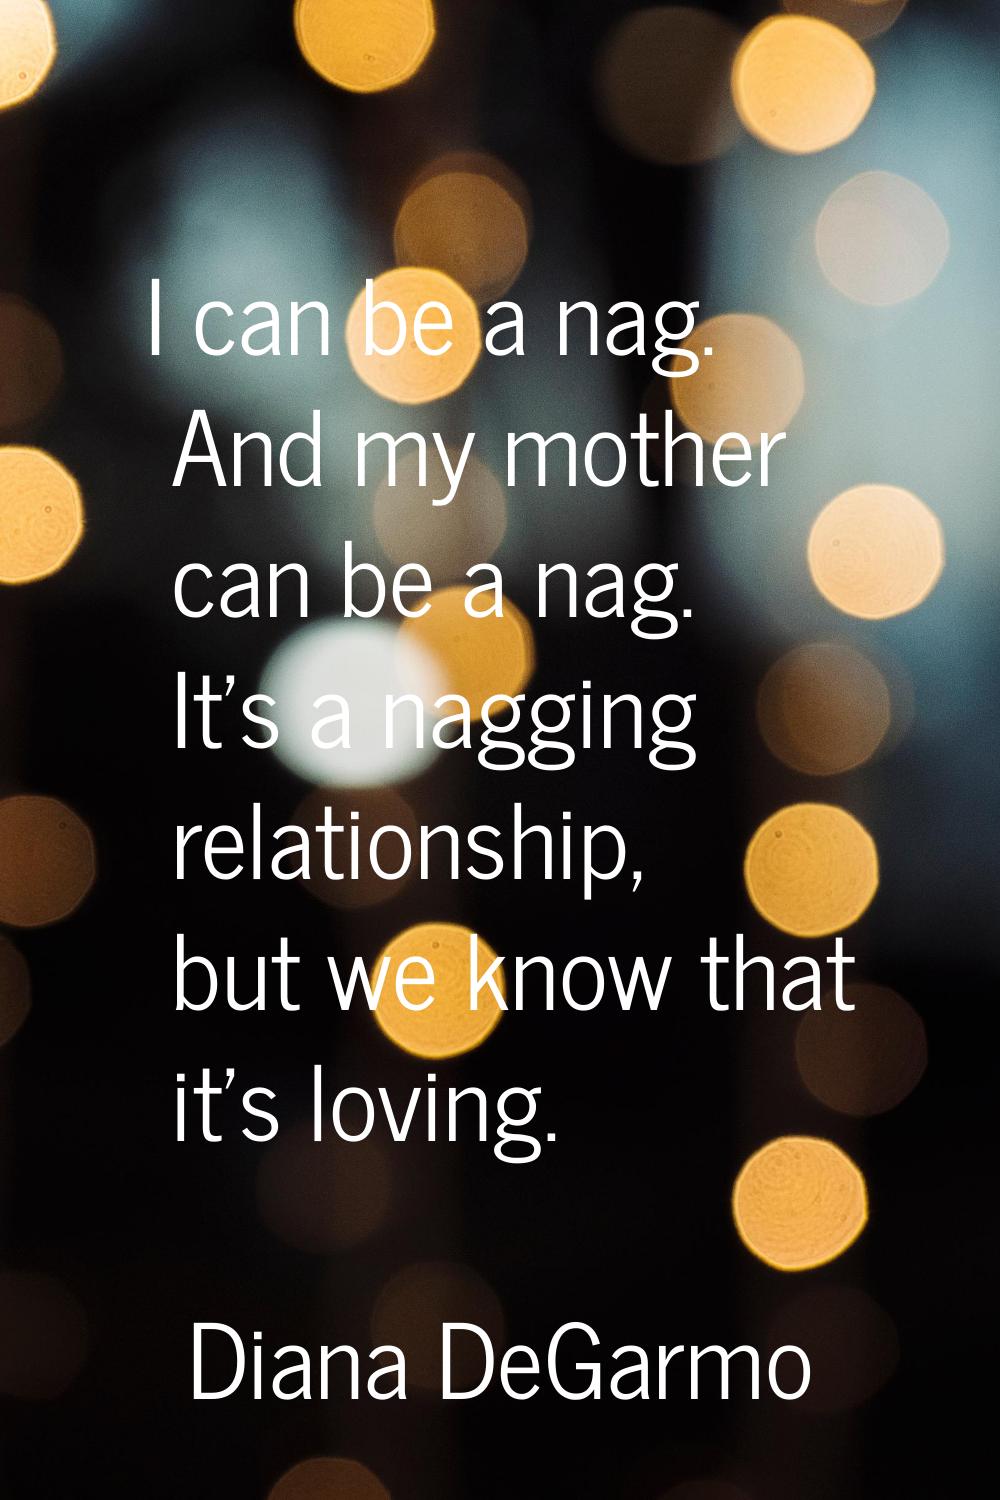 I can be a nag. And my mother can be a nag. It's a nagging relationship, but we know that it's lovi